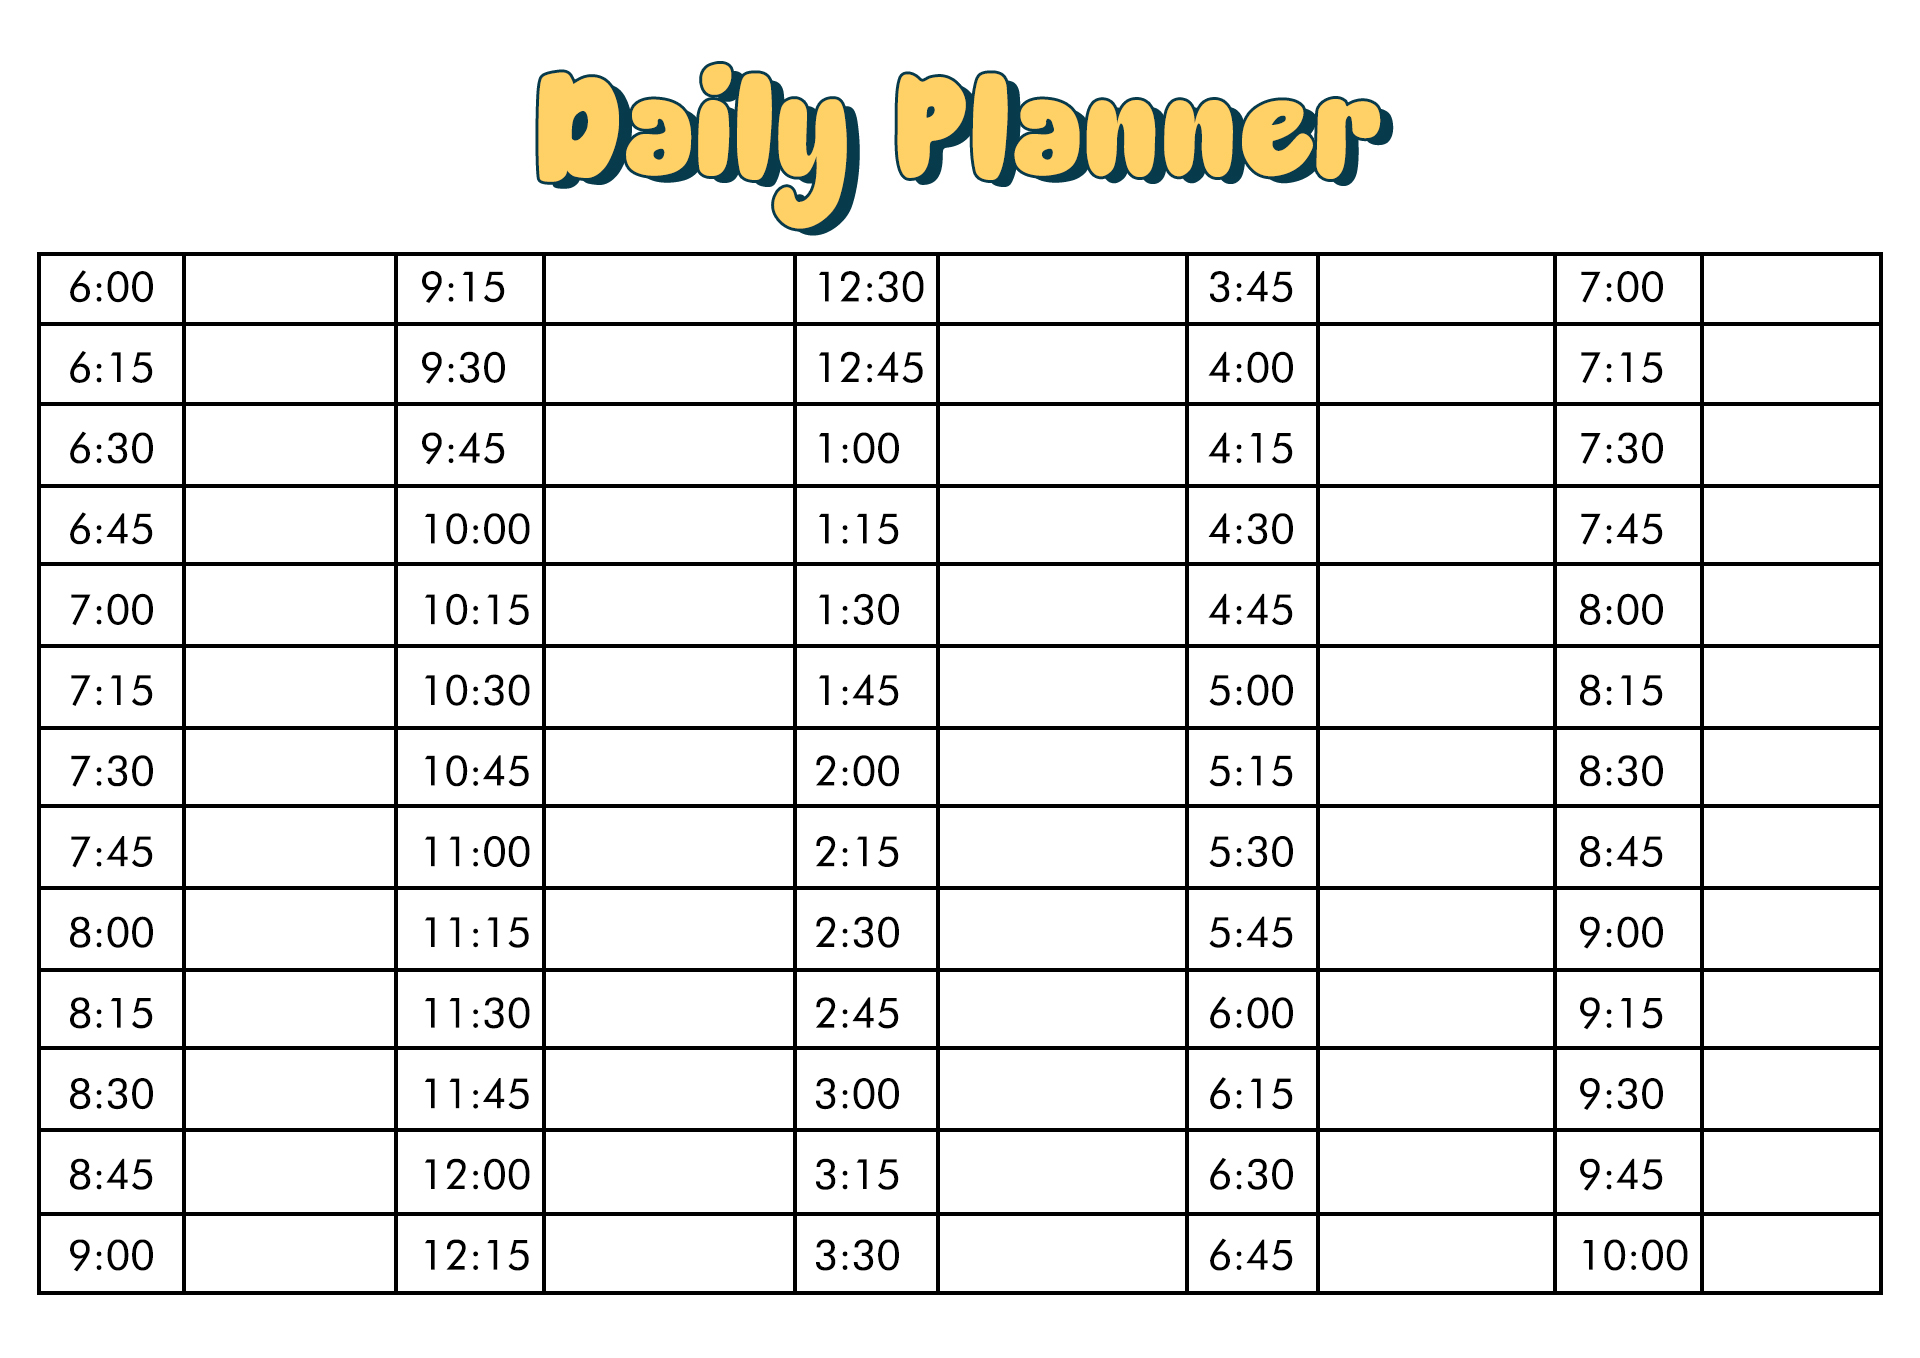 Daily Calendar with 15 Minute Increments